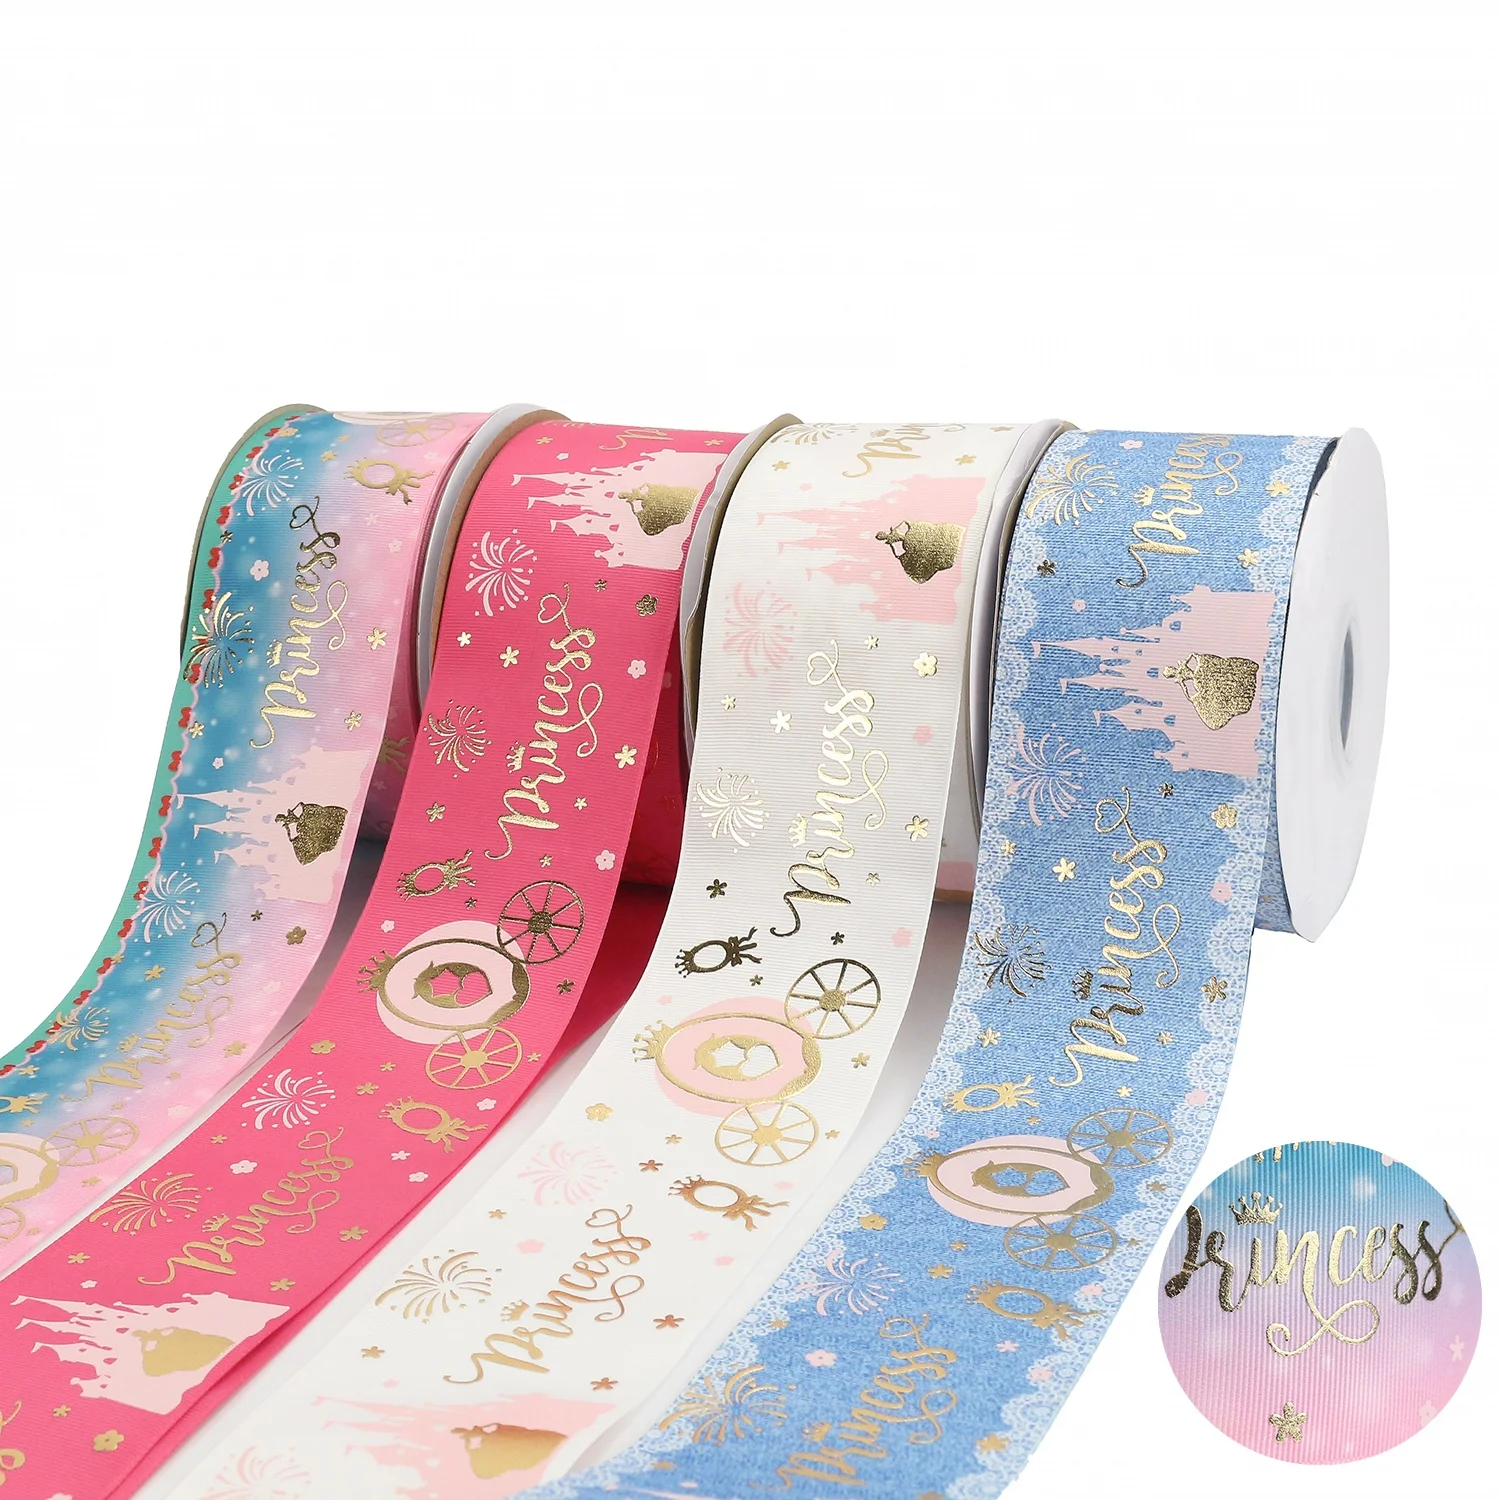 

Midi Ribbons Popular Listones 3" Gold Foil Printed Princess Grosgrain Ribbon Roll For Crafts Hair Bow, Request